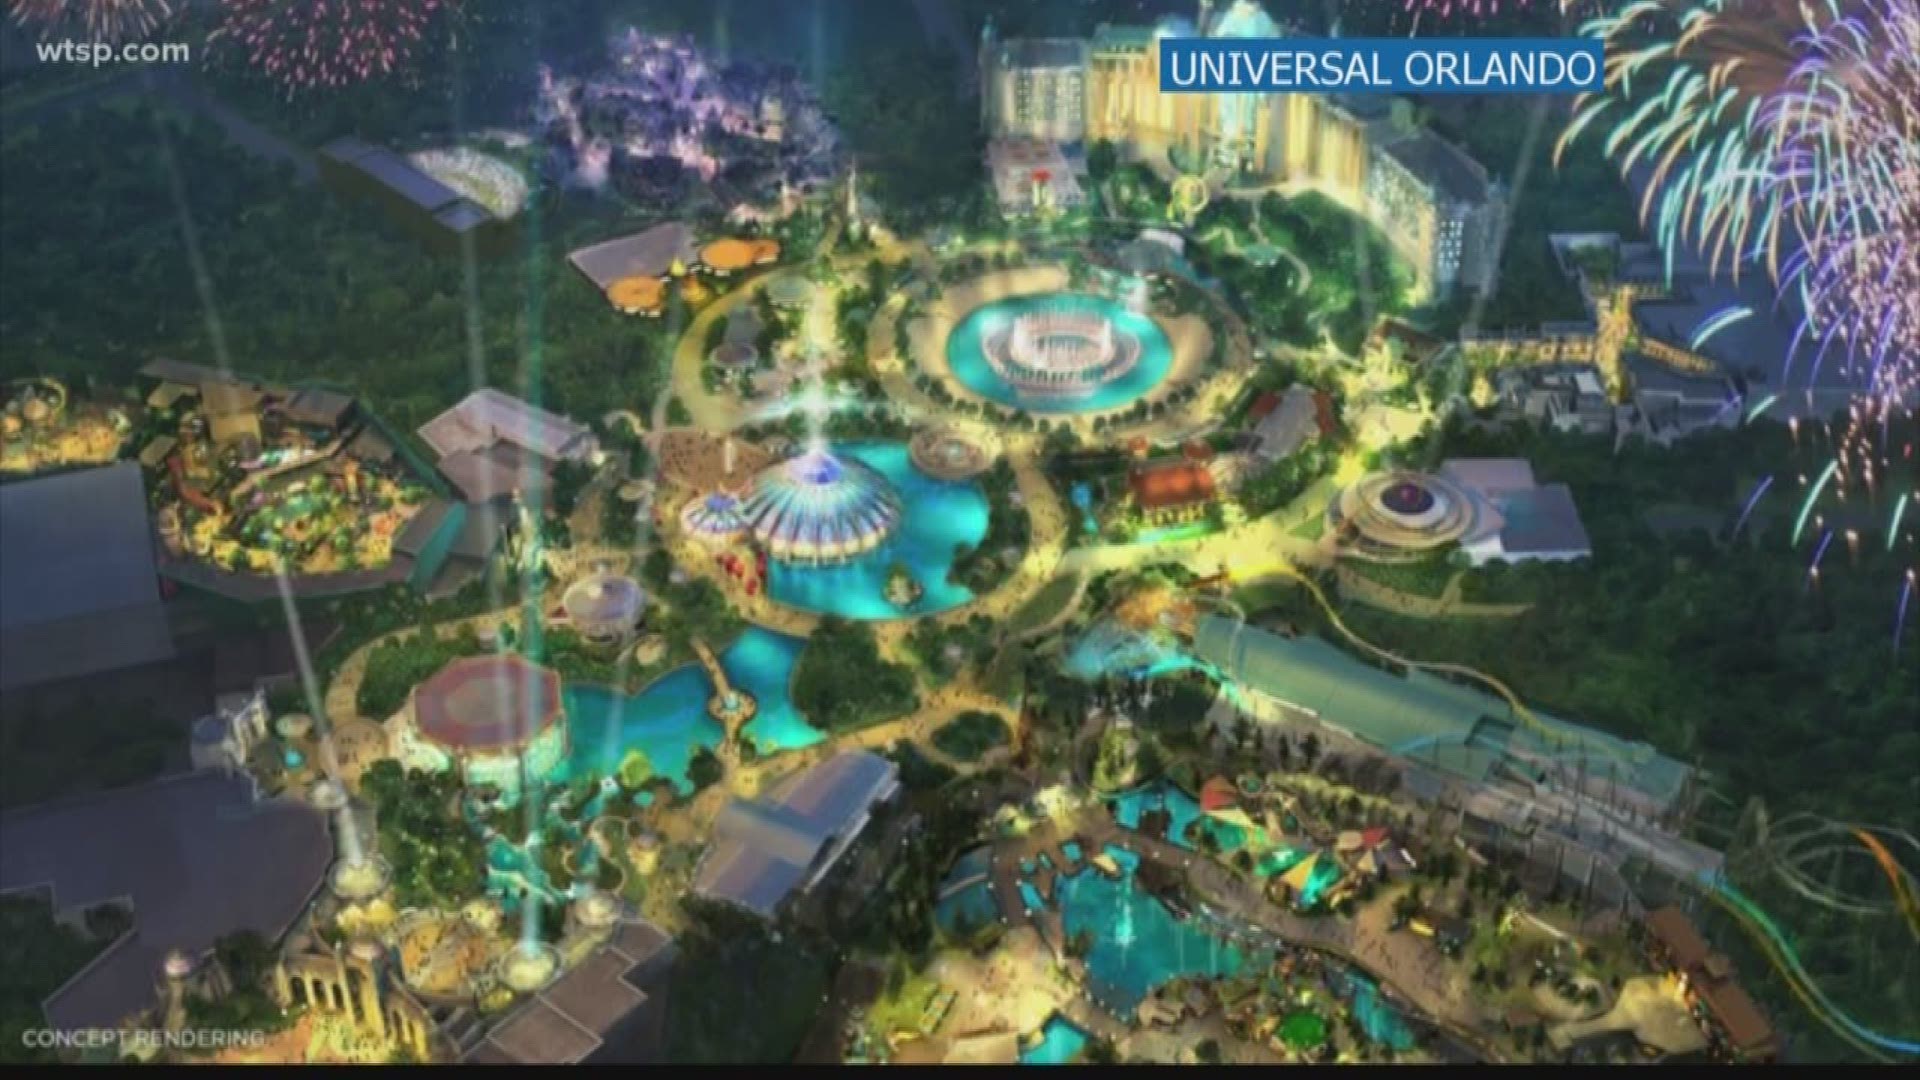 Universal Orlando is building a new theme park: Epic Universe.

At a Thursday morning news conference, the company announced the new park will be the largest investment in one of its theme parks.

Universal said the new theme park will be on a large swath of land near the Orange County Convention Center. According to property records, Universal Creative Partners own more than 500 acres near the convention center.